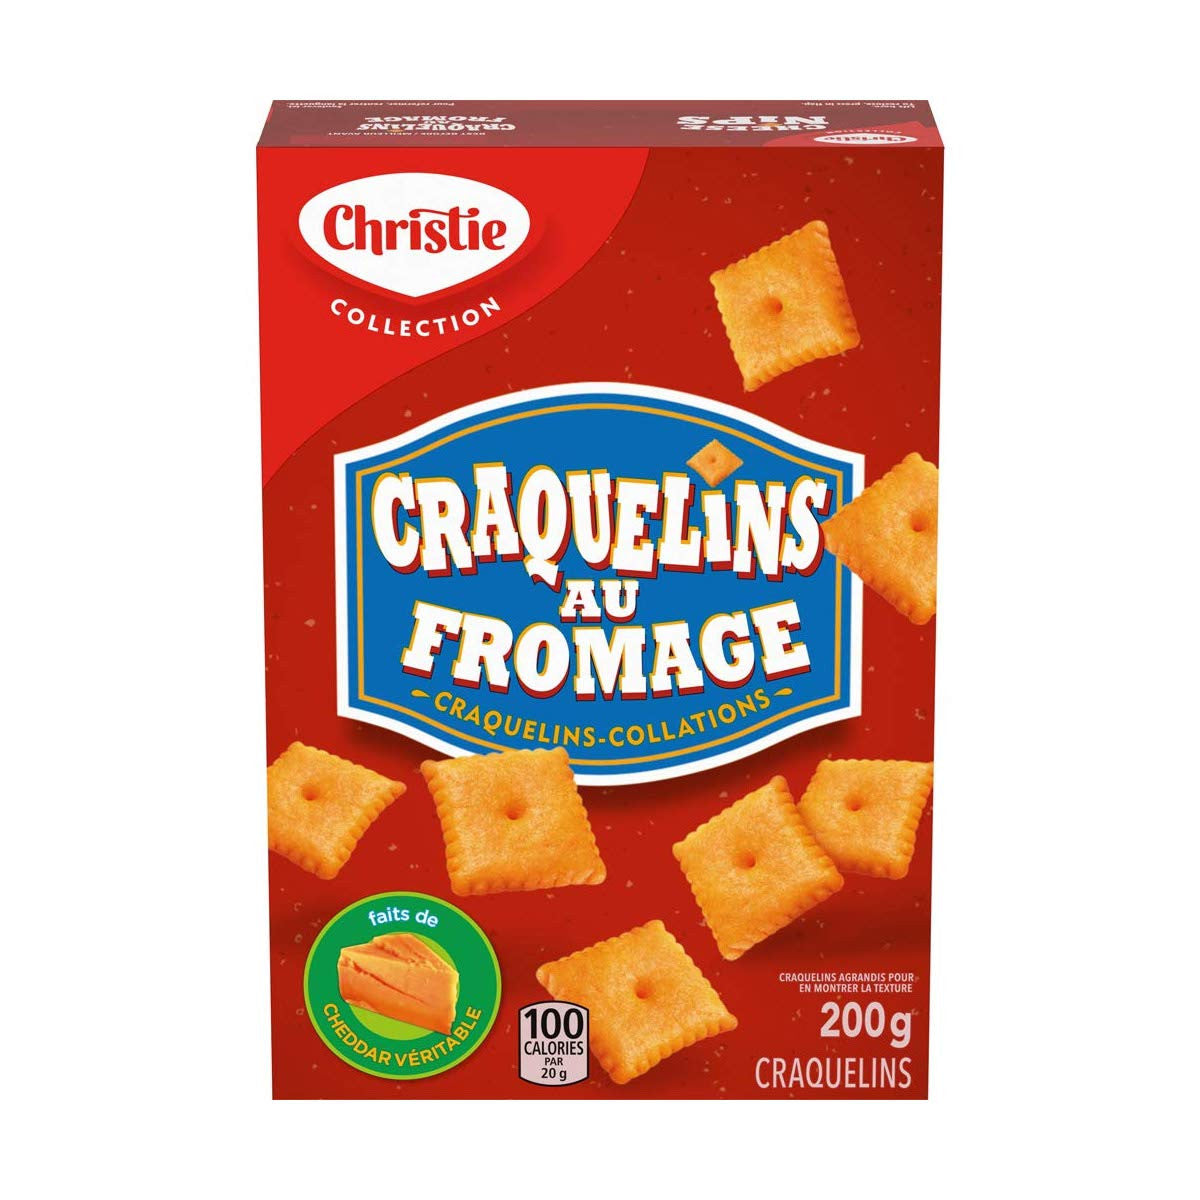 Christie Cheese Nips Cheddar Baked Snack Crackers, 200g/7.05oz, 2-Box {Imported from Canada}